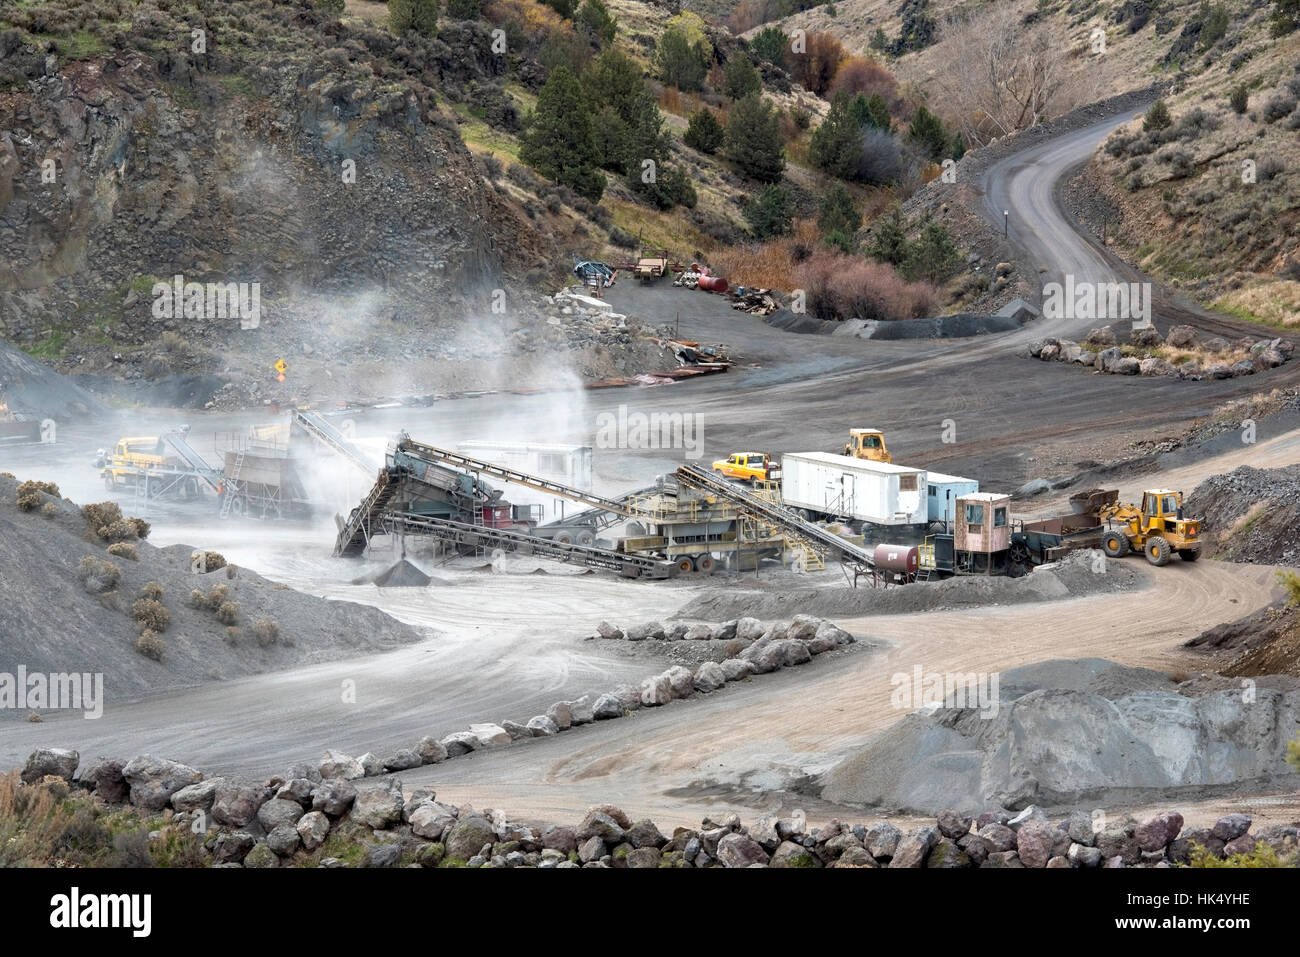 Rock Quarry with Conveyors, Rock Crusher and Heavy Equipment in a Canyon Stock Photo